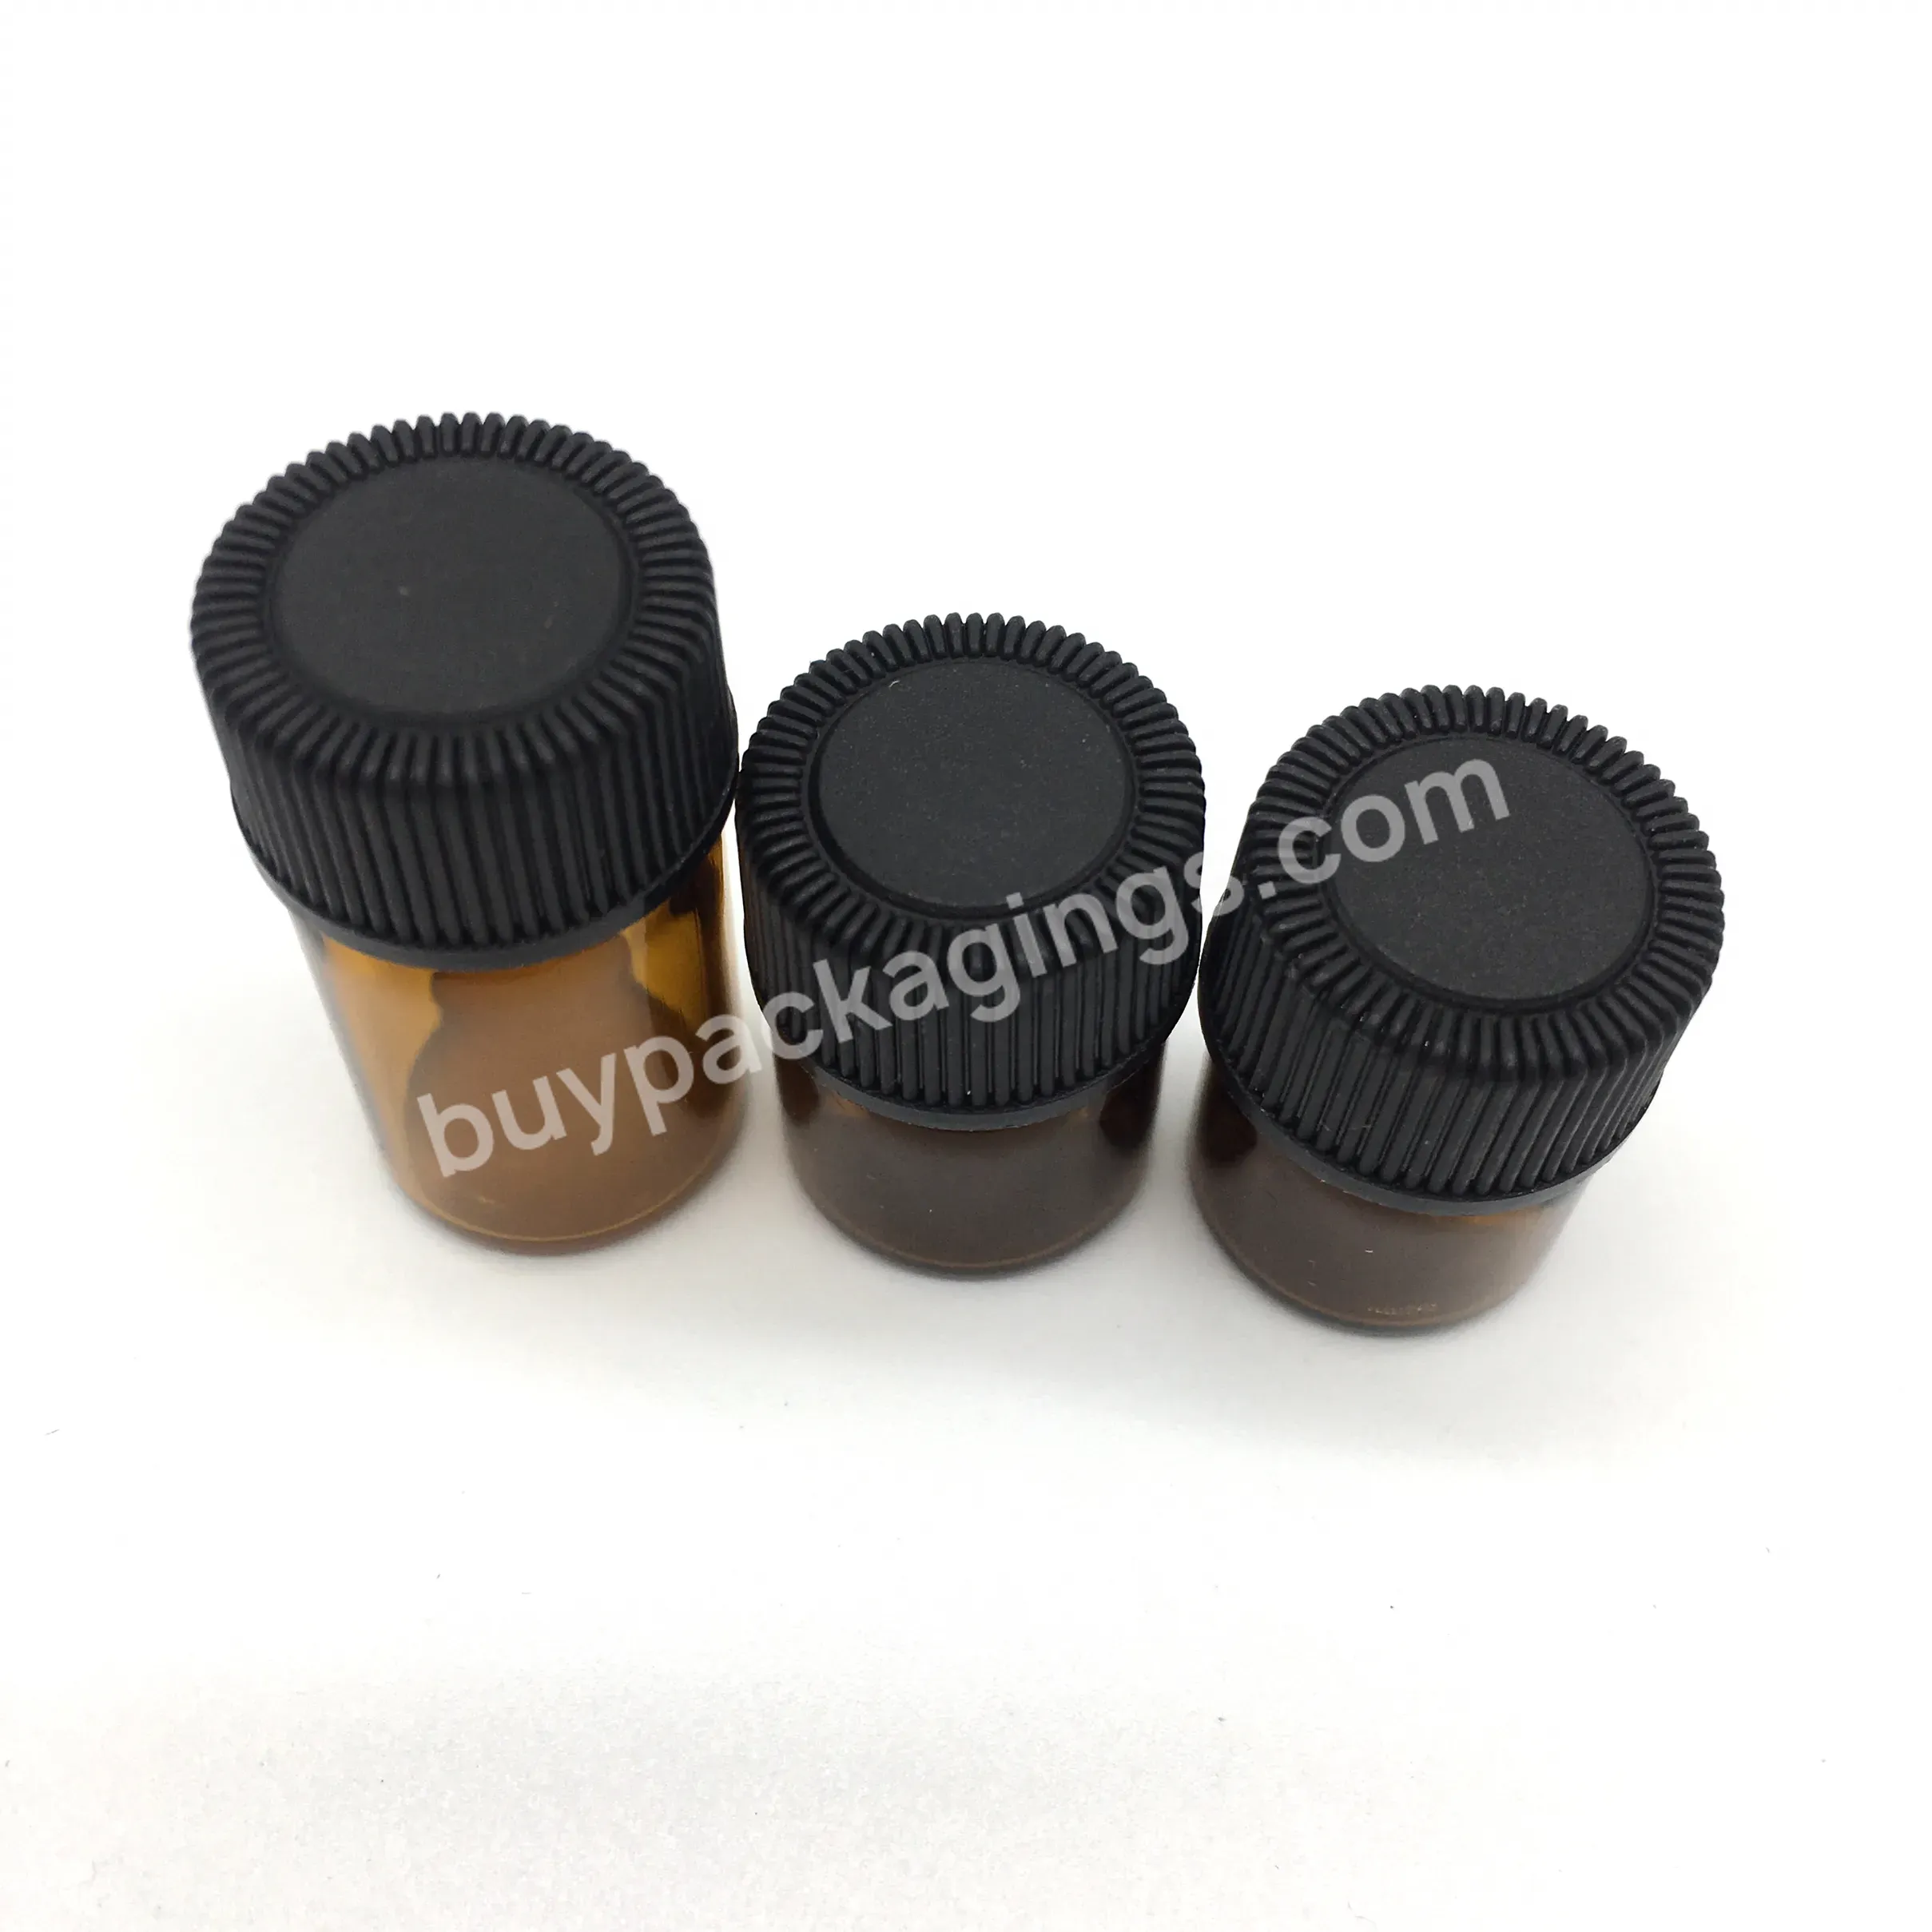 Wholesale Empty Essential Oil Amber Glass Sample Vials With Orifice Reducer And Cap 1ml 2ml - Buy Empty Sample Vials 1ml For Essential Oil,1ml Amber Glass Bottle 2m Double Bayonet Glass Bottle,Glass Bottle With Orifice Reducer And Screw Cap.